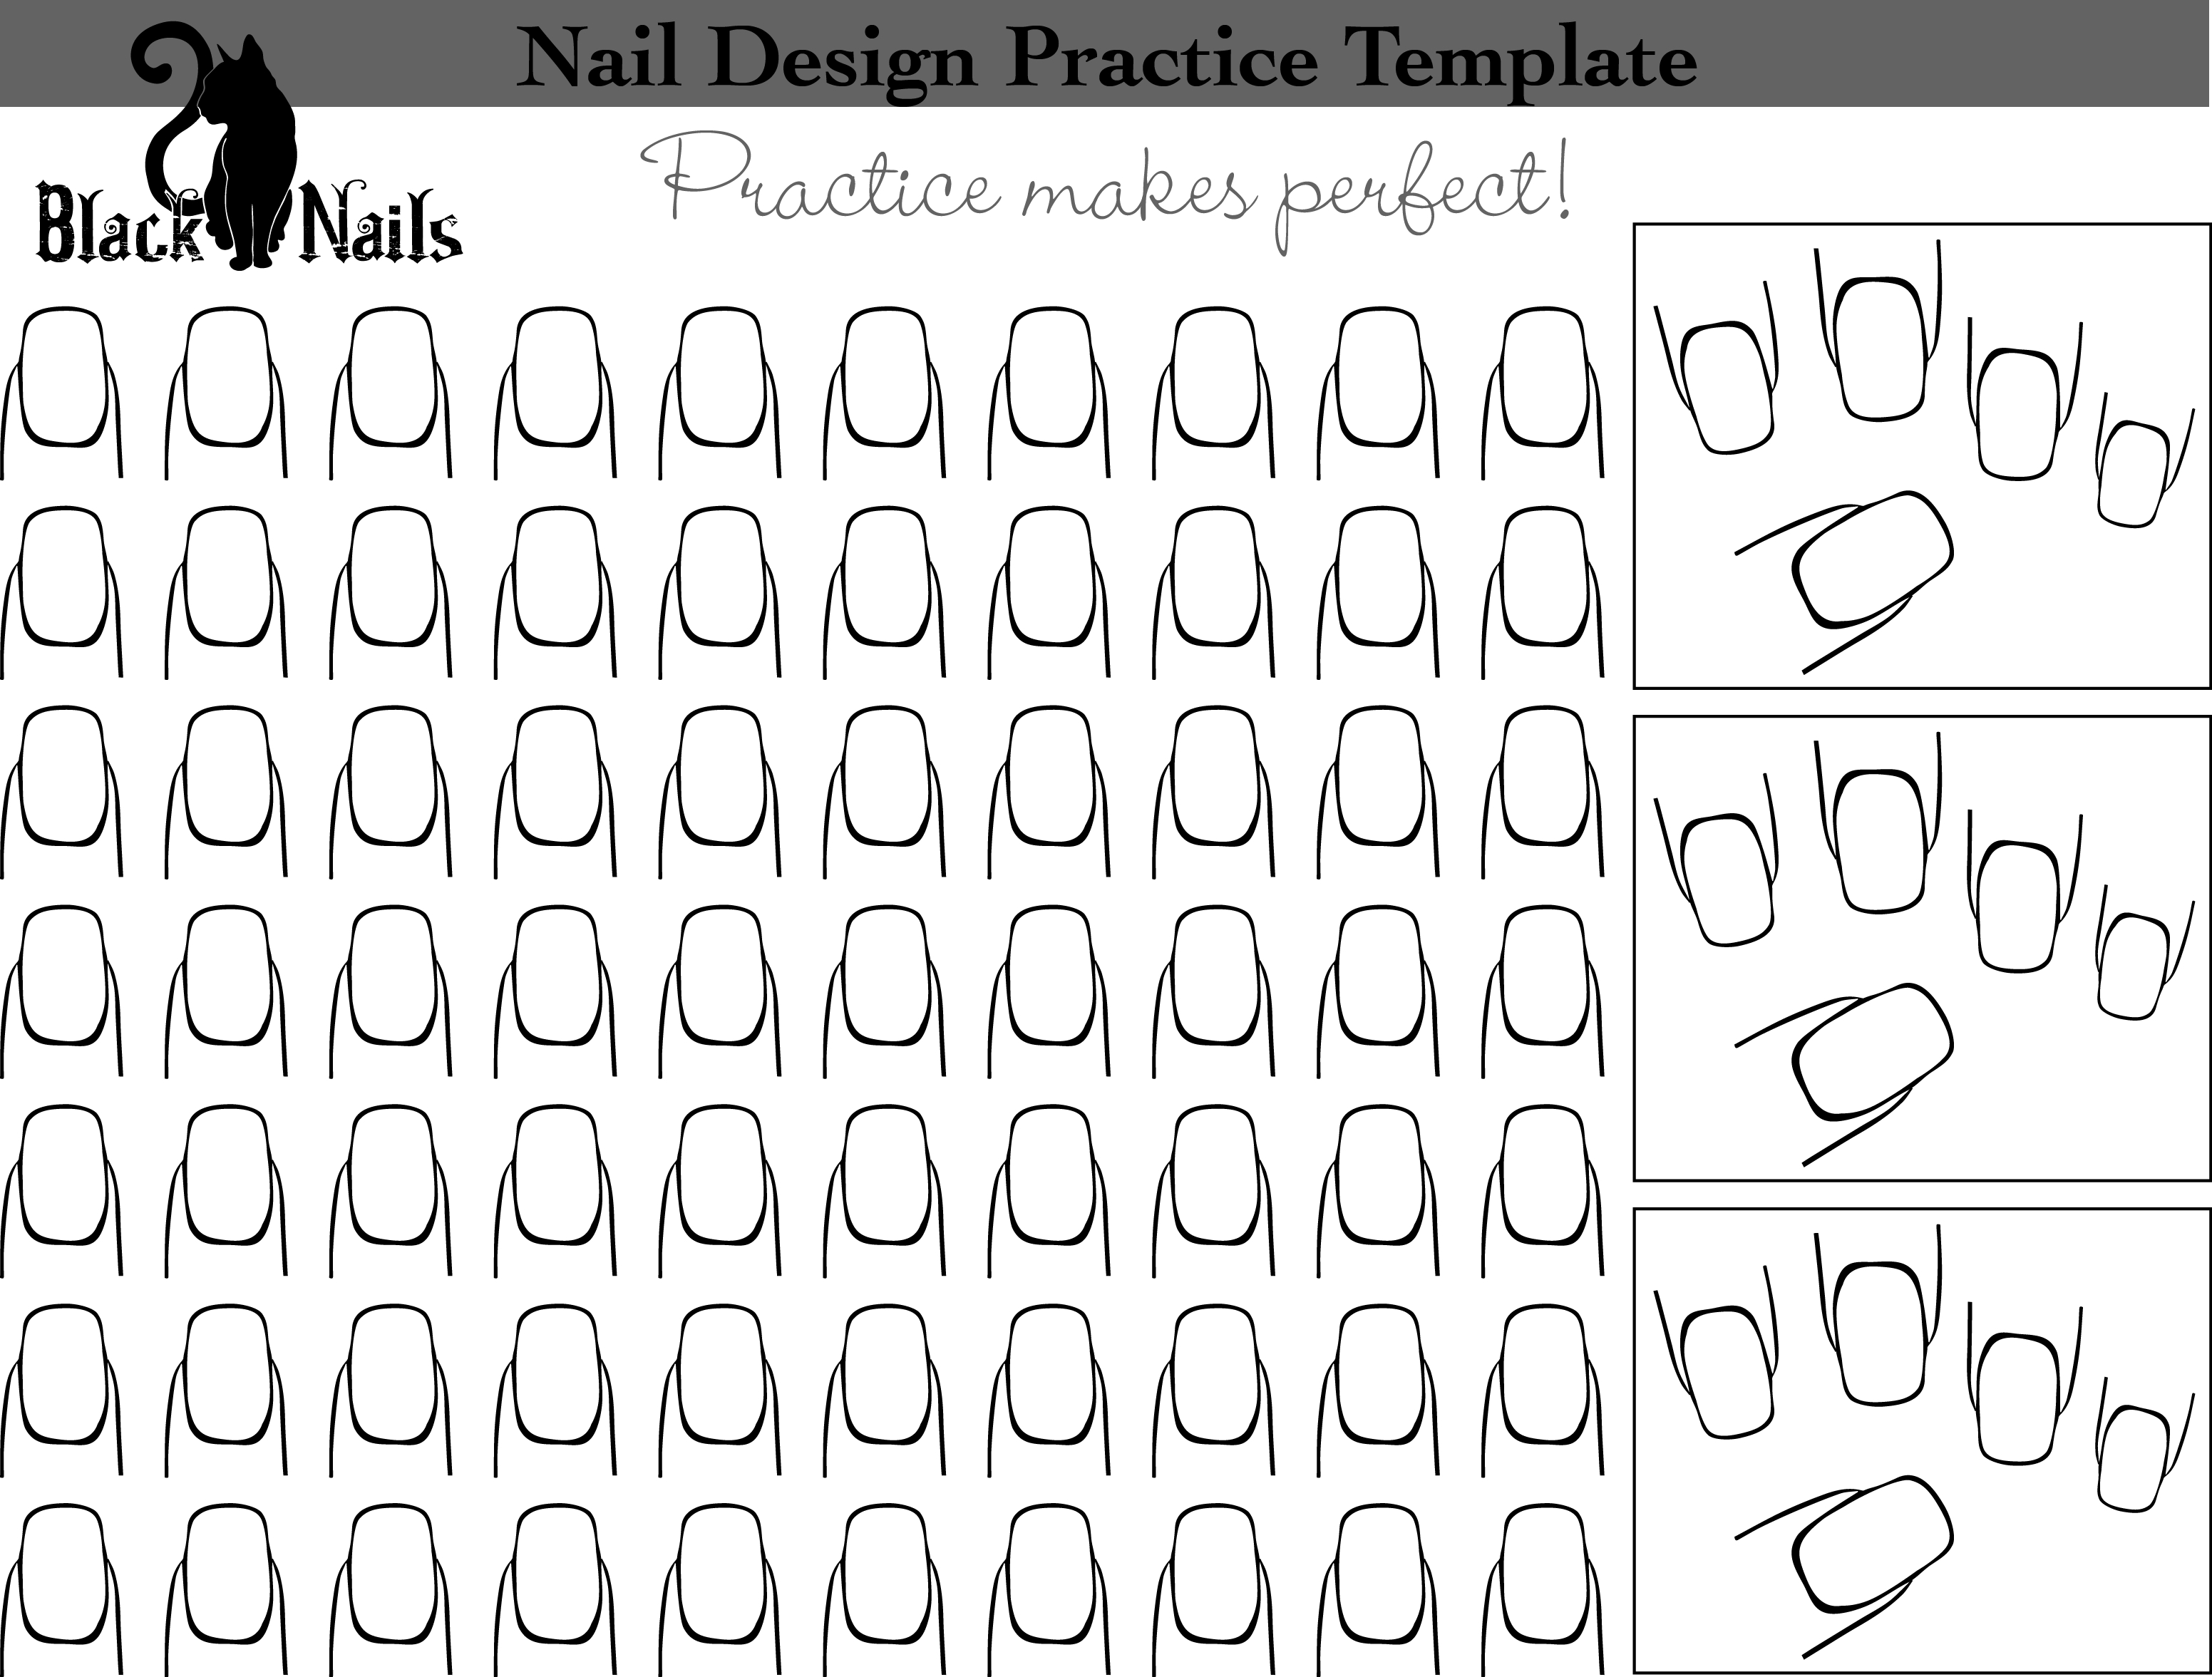 6. Nail Art Designs That Are Office-Appropriate - wide 2